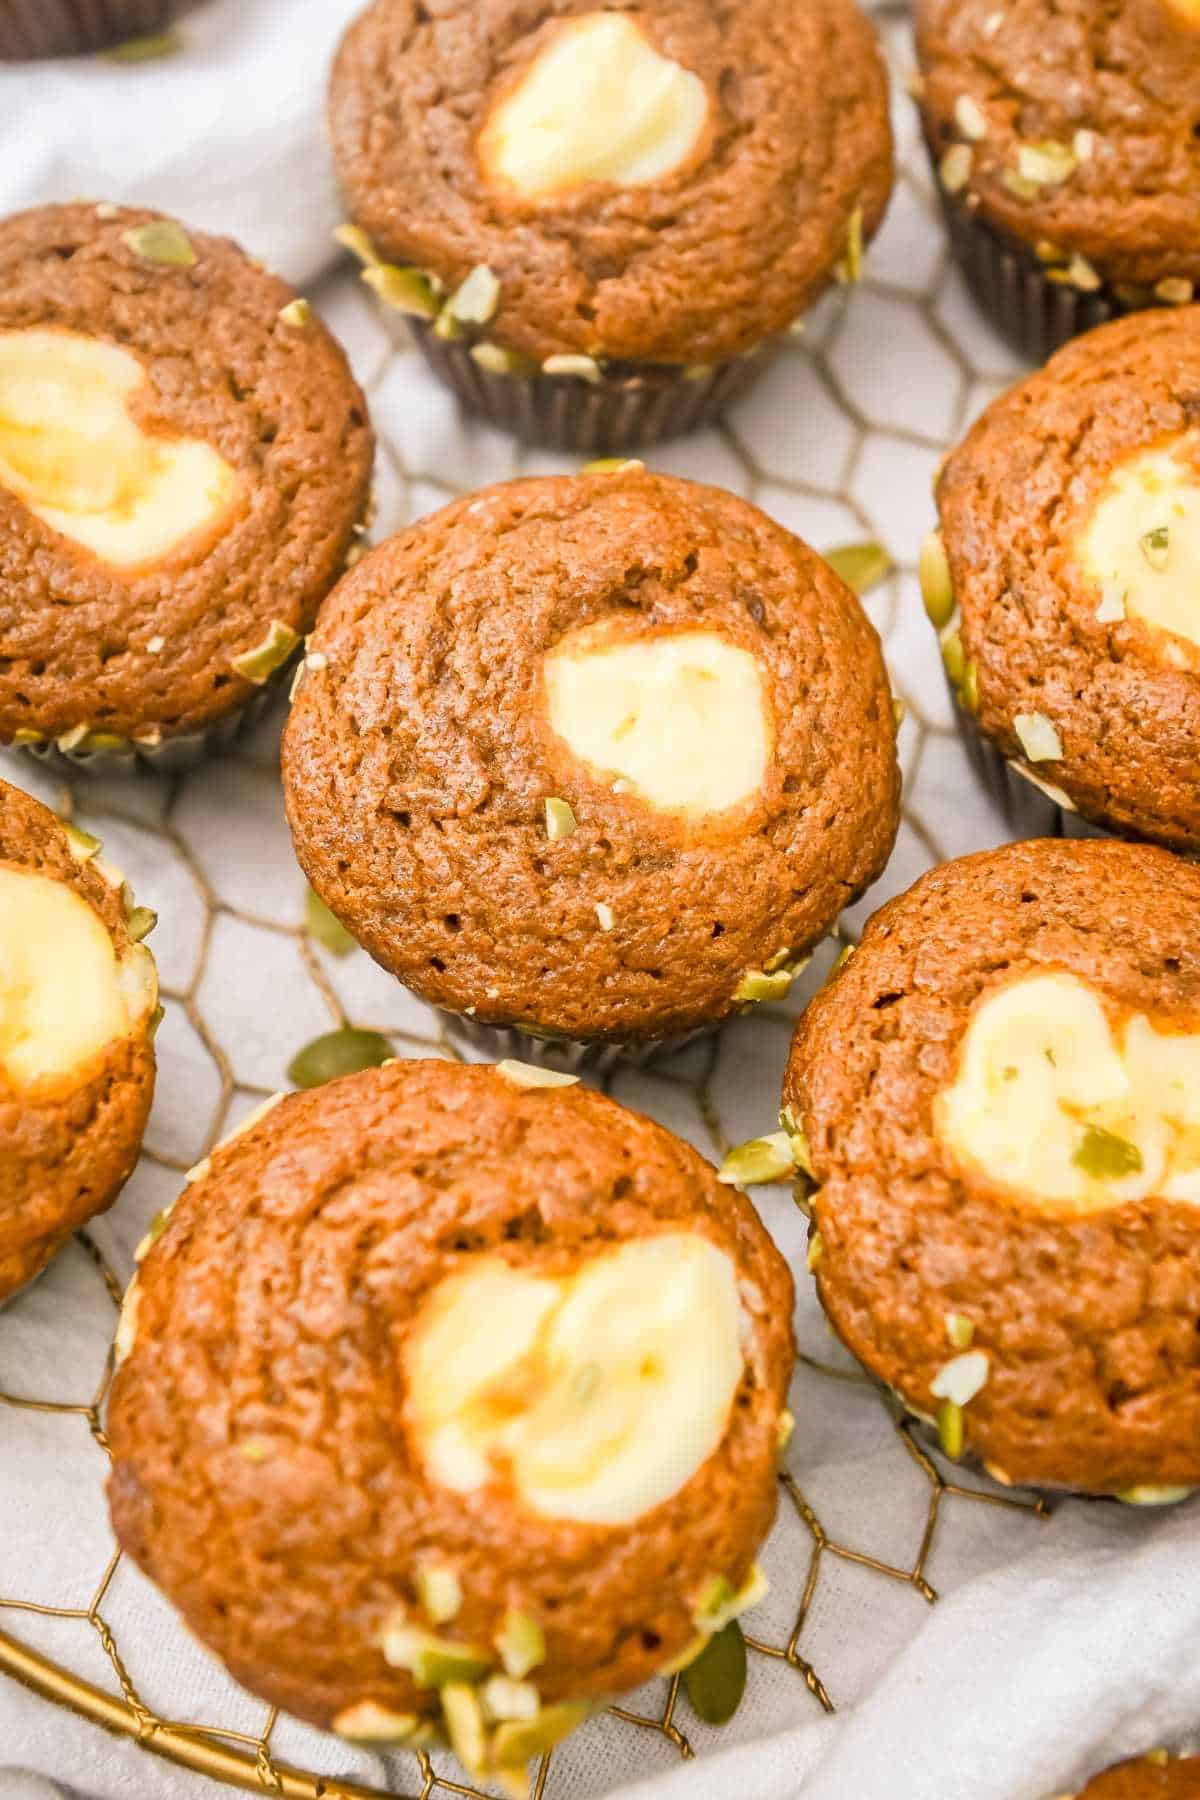 starbucks pumpkin muffins topped with cream cheese filling on a gold wire plate.